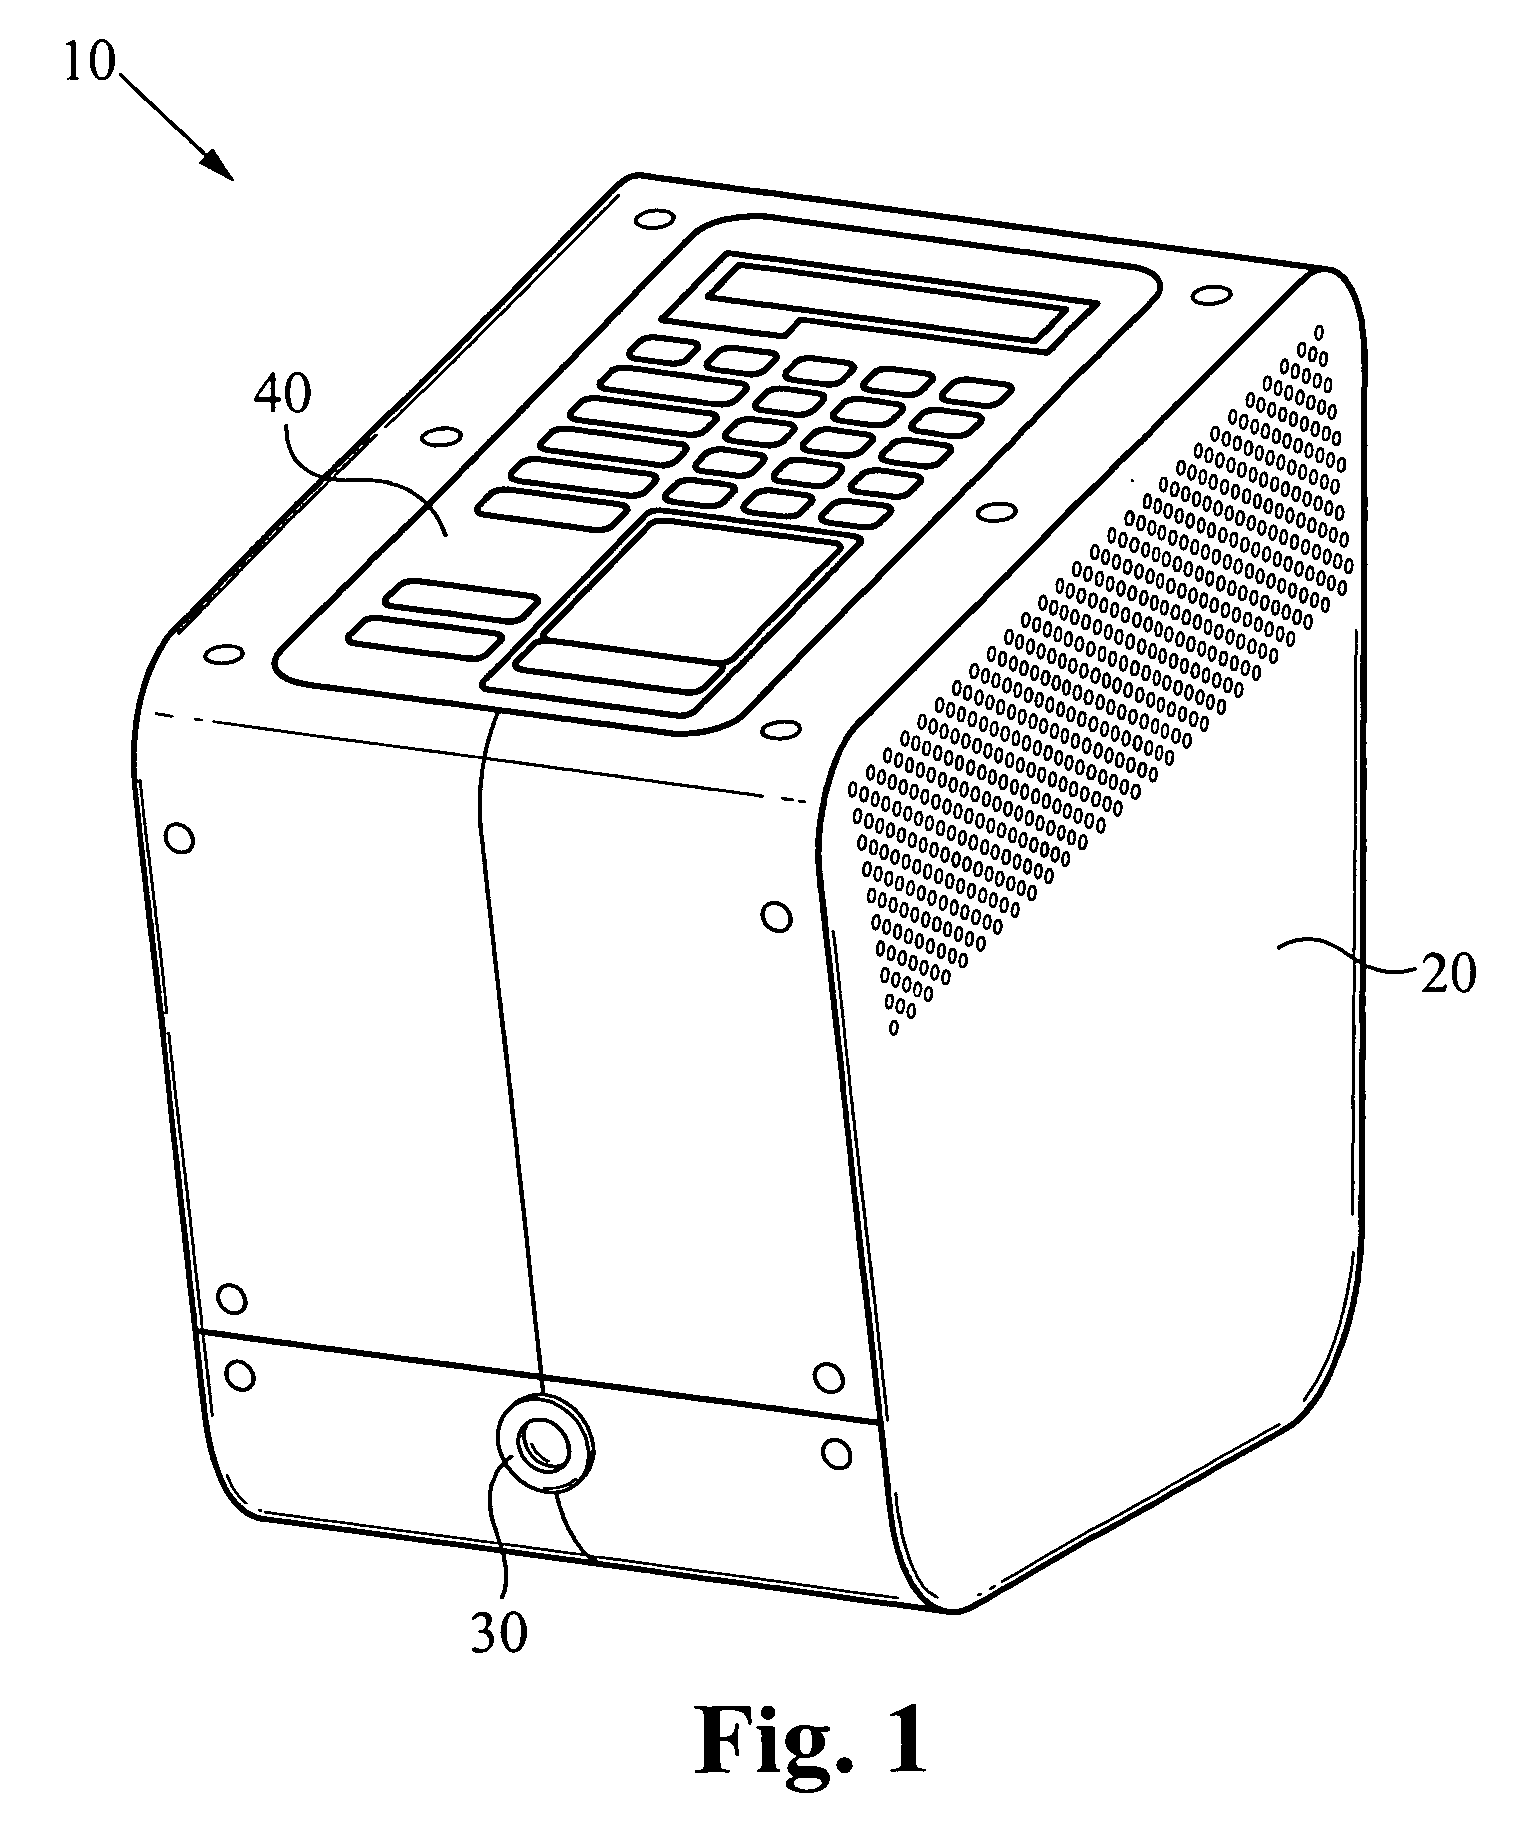 Apparatus to automatically lyse a sample